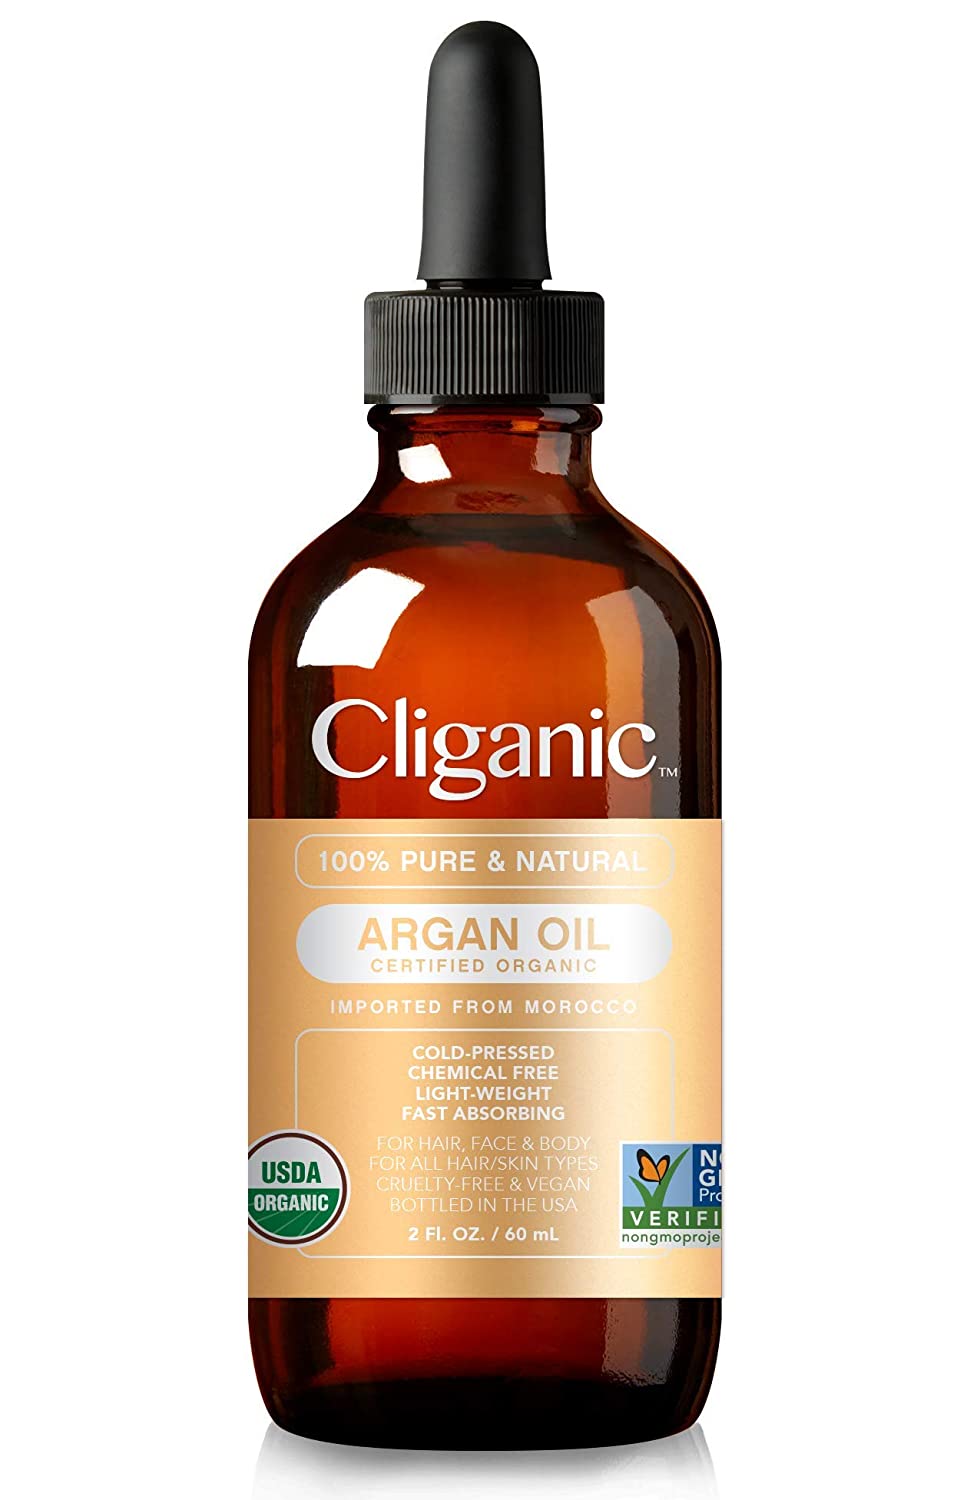 Cliganic USDA Organic Argan Oil, 100% Pure | Moroccan Argan Oil for Hair, Face & Skin | Natural Cold Pressed Carrier Oil - Certified Organic | Cliganic 90 Days Warranty